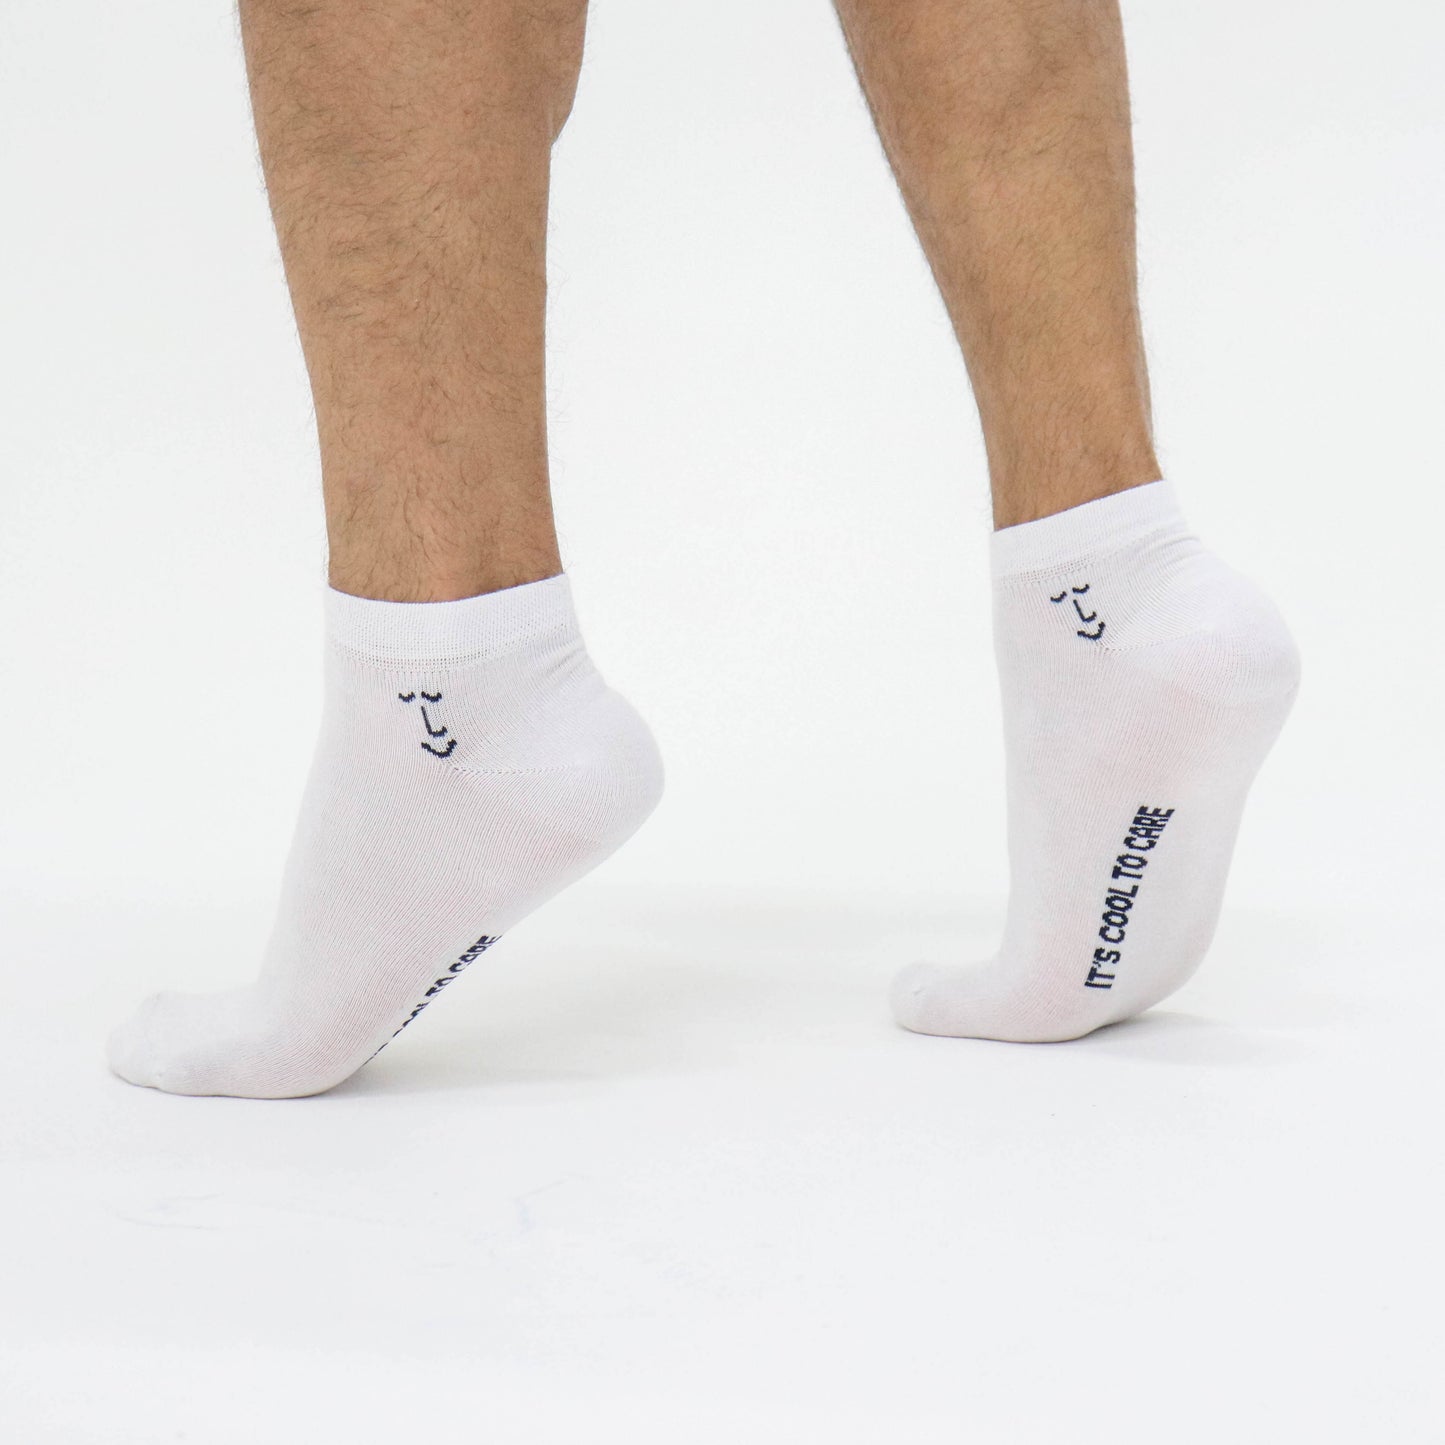 'It's Cool to Care' Leiho Bamboo Trainer Socks - White